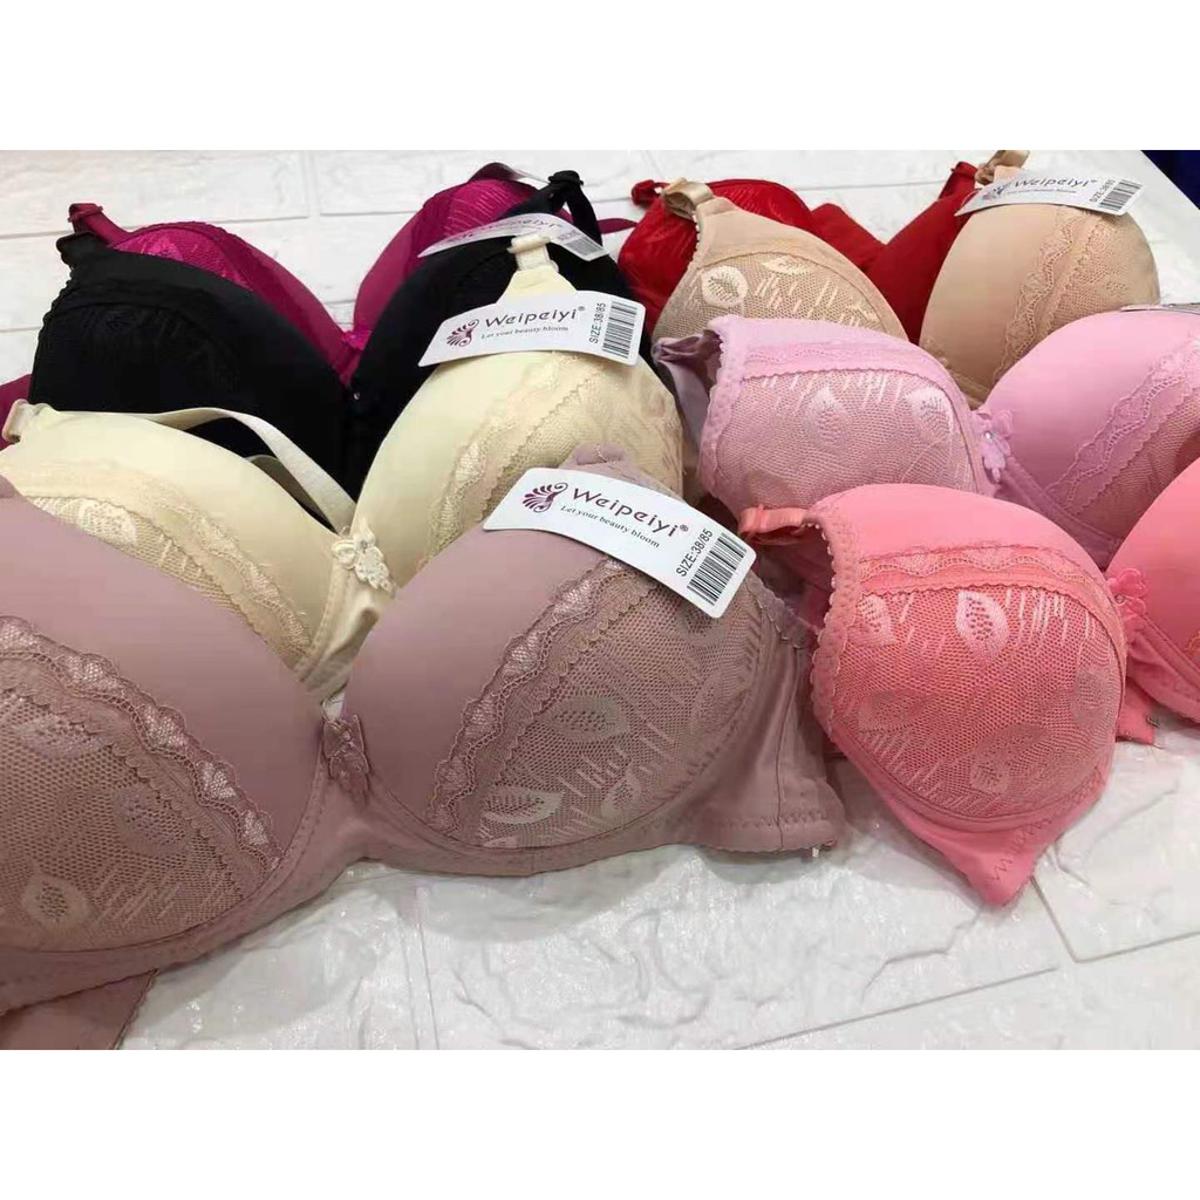 ladies bra good quality brazier 32-42 size in a pack of 1